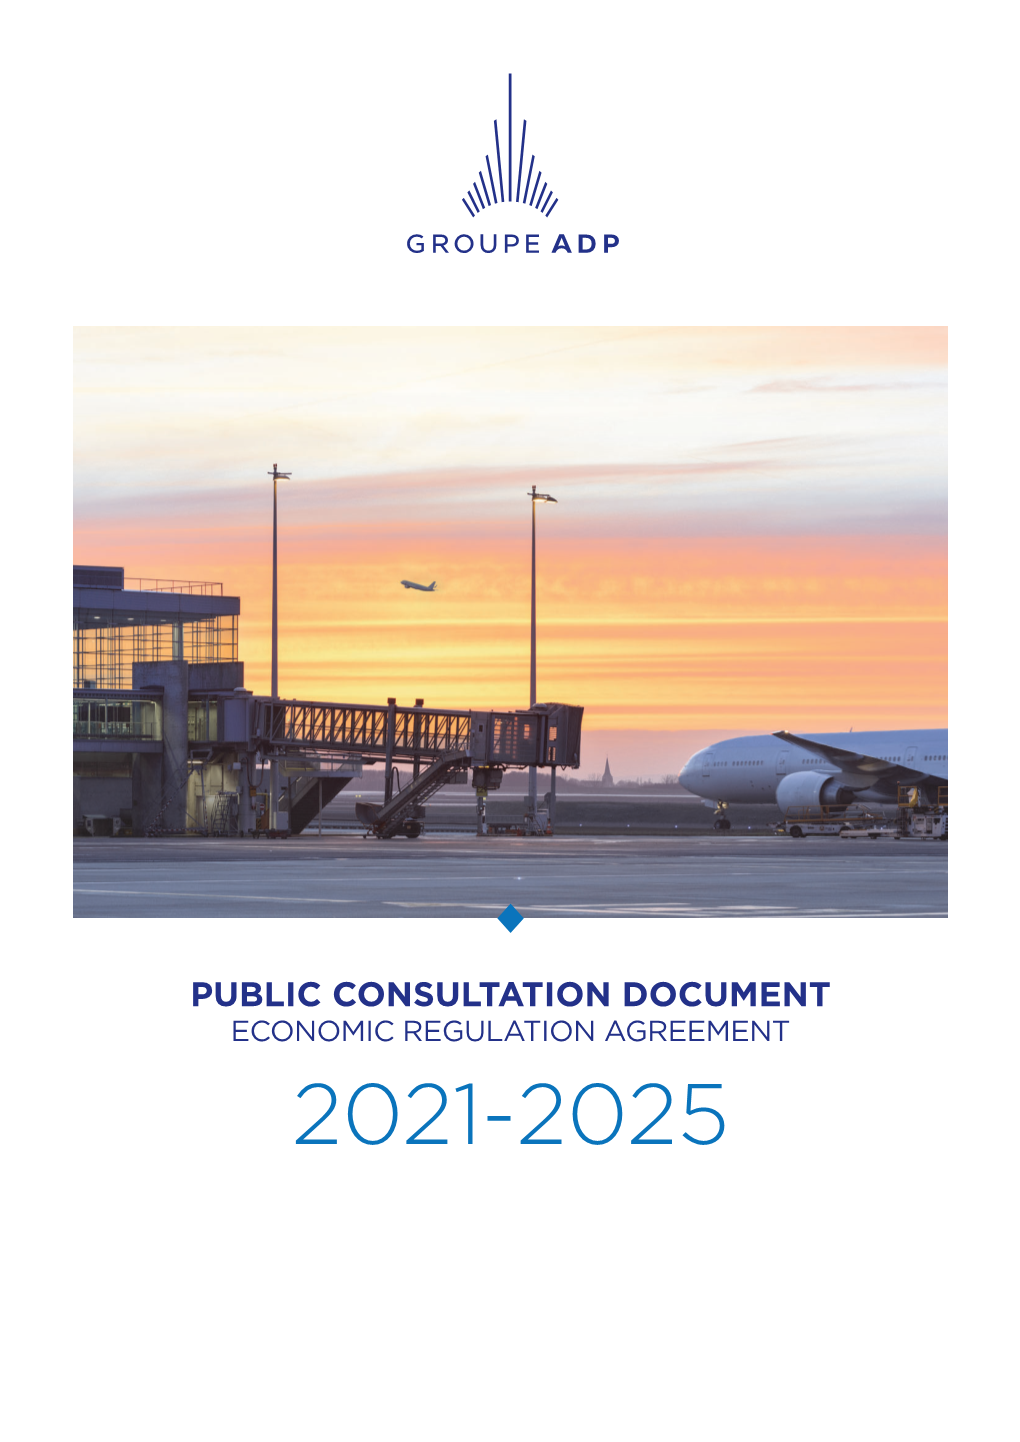 Public Consultation Document Economic Regulation Agreement 2021-2025 Message from the Chairman & Ceo